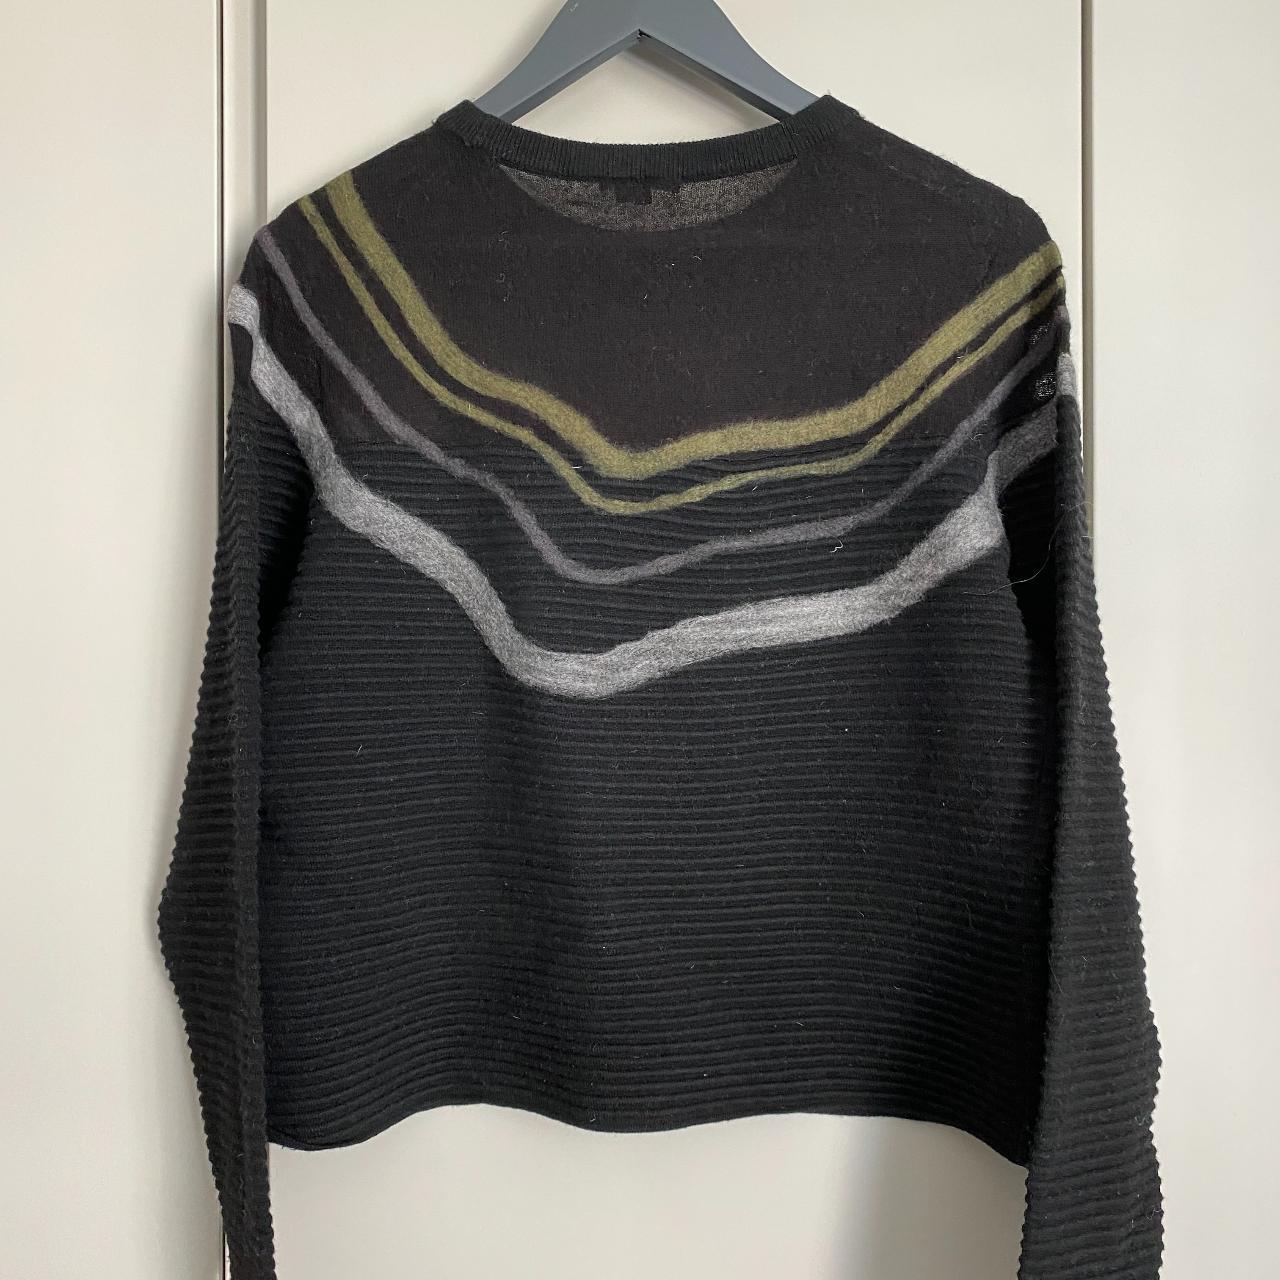 Raoul grey/black Jumper with stripe detail size small - Depop